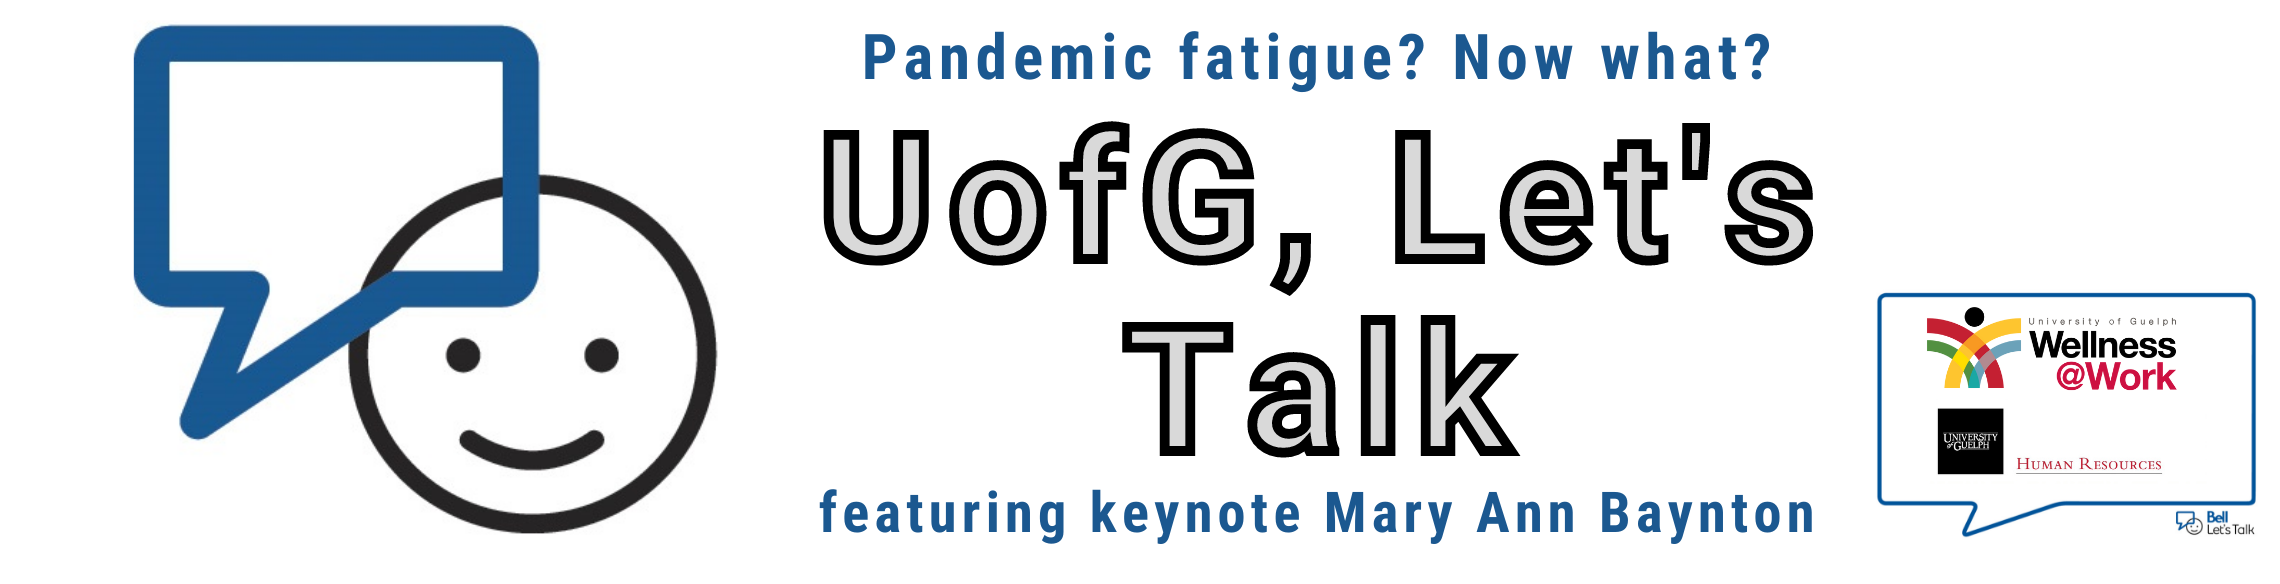 Bell Let's Talk Logo with writing saying "Pandemic fatigue? Now what? U of G, Let's Talk featuring keynote Mary Ann Baynton."